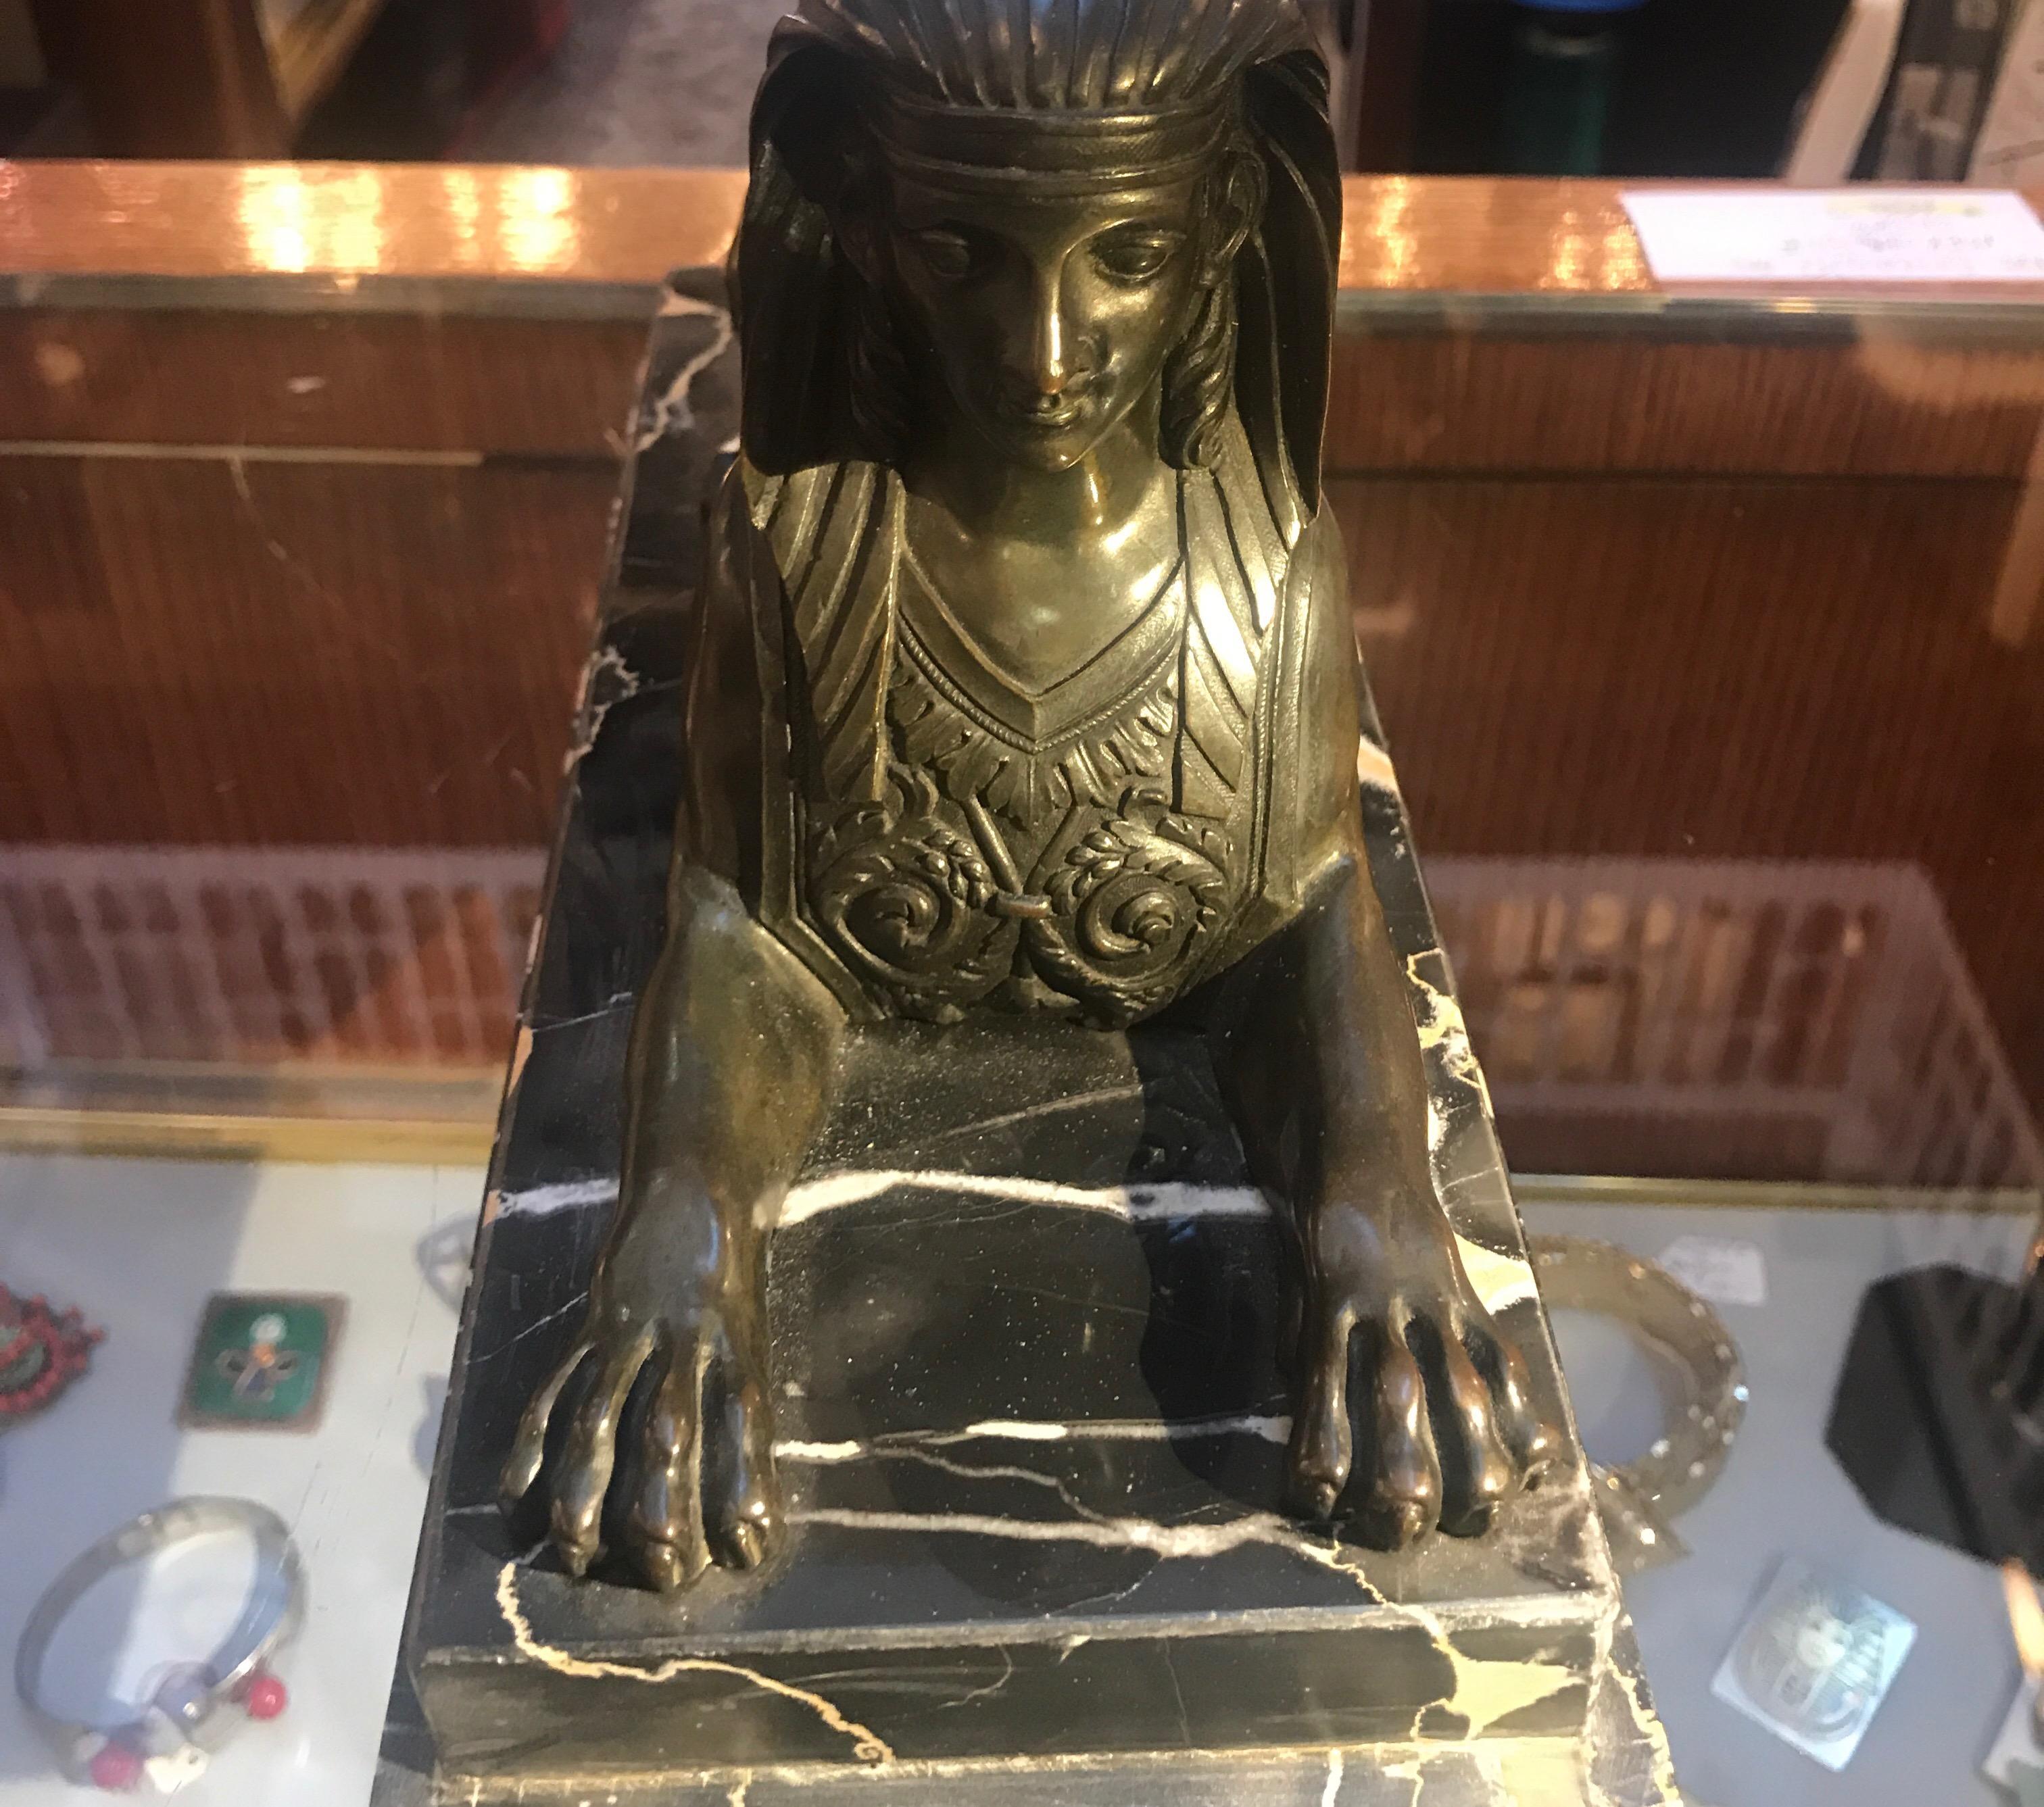 Stunning patinated bronze of sculpture sphinx. Beautifully cast bronze and patinated finish on an Italian Nero Portoro marble base, circa 1870s, Second Empire period.